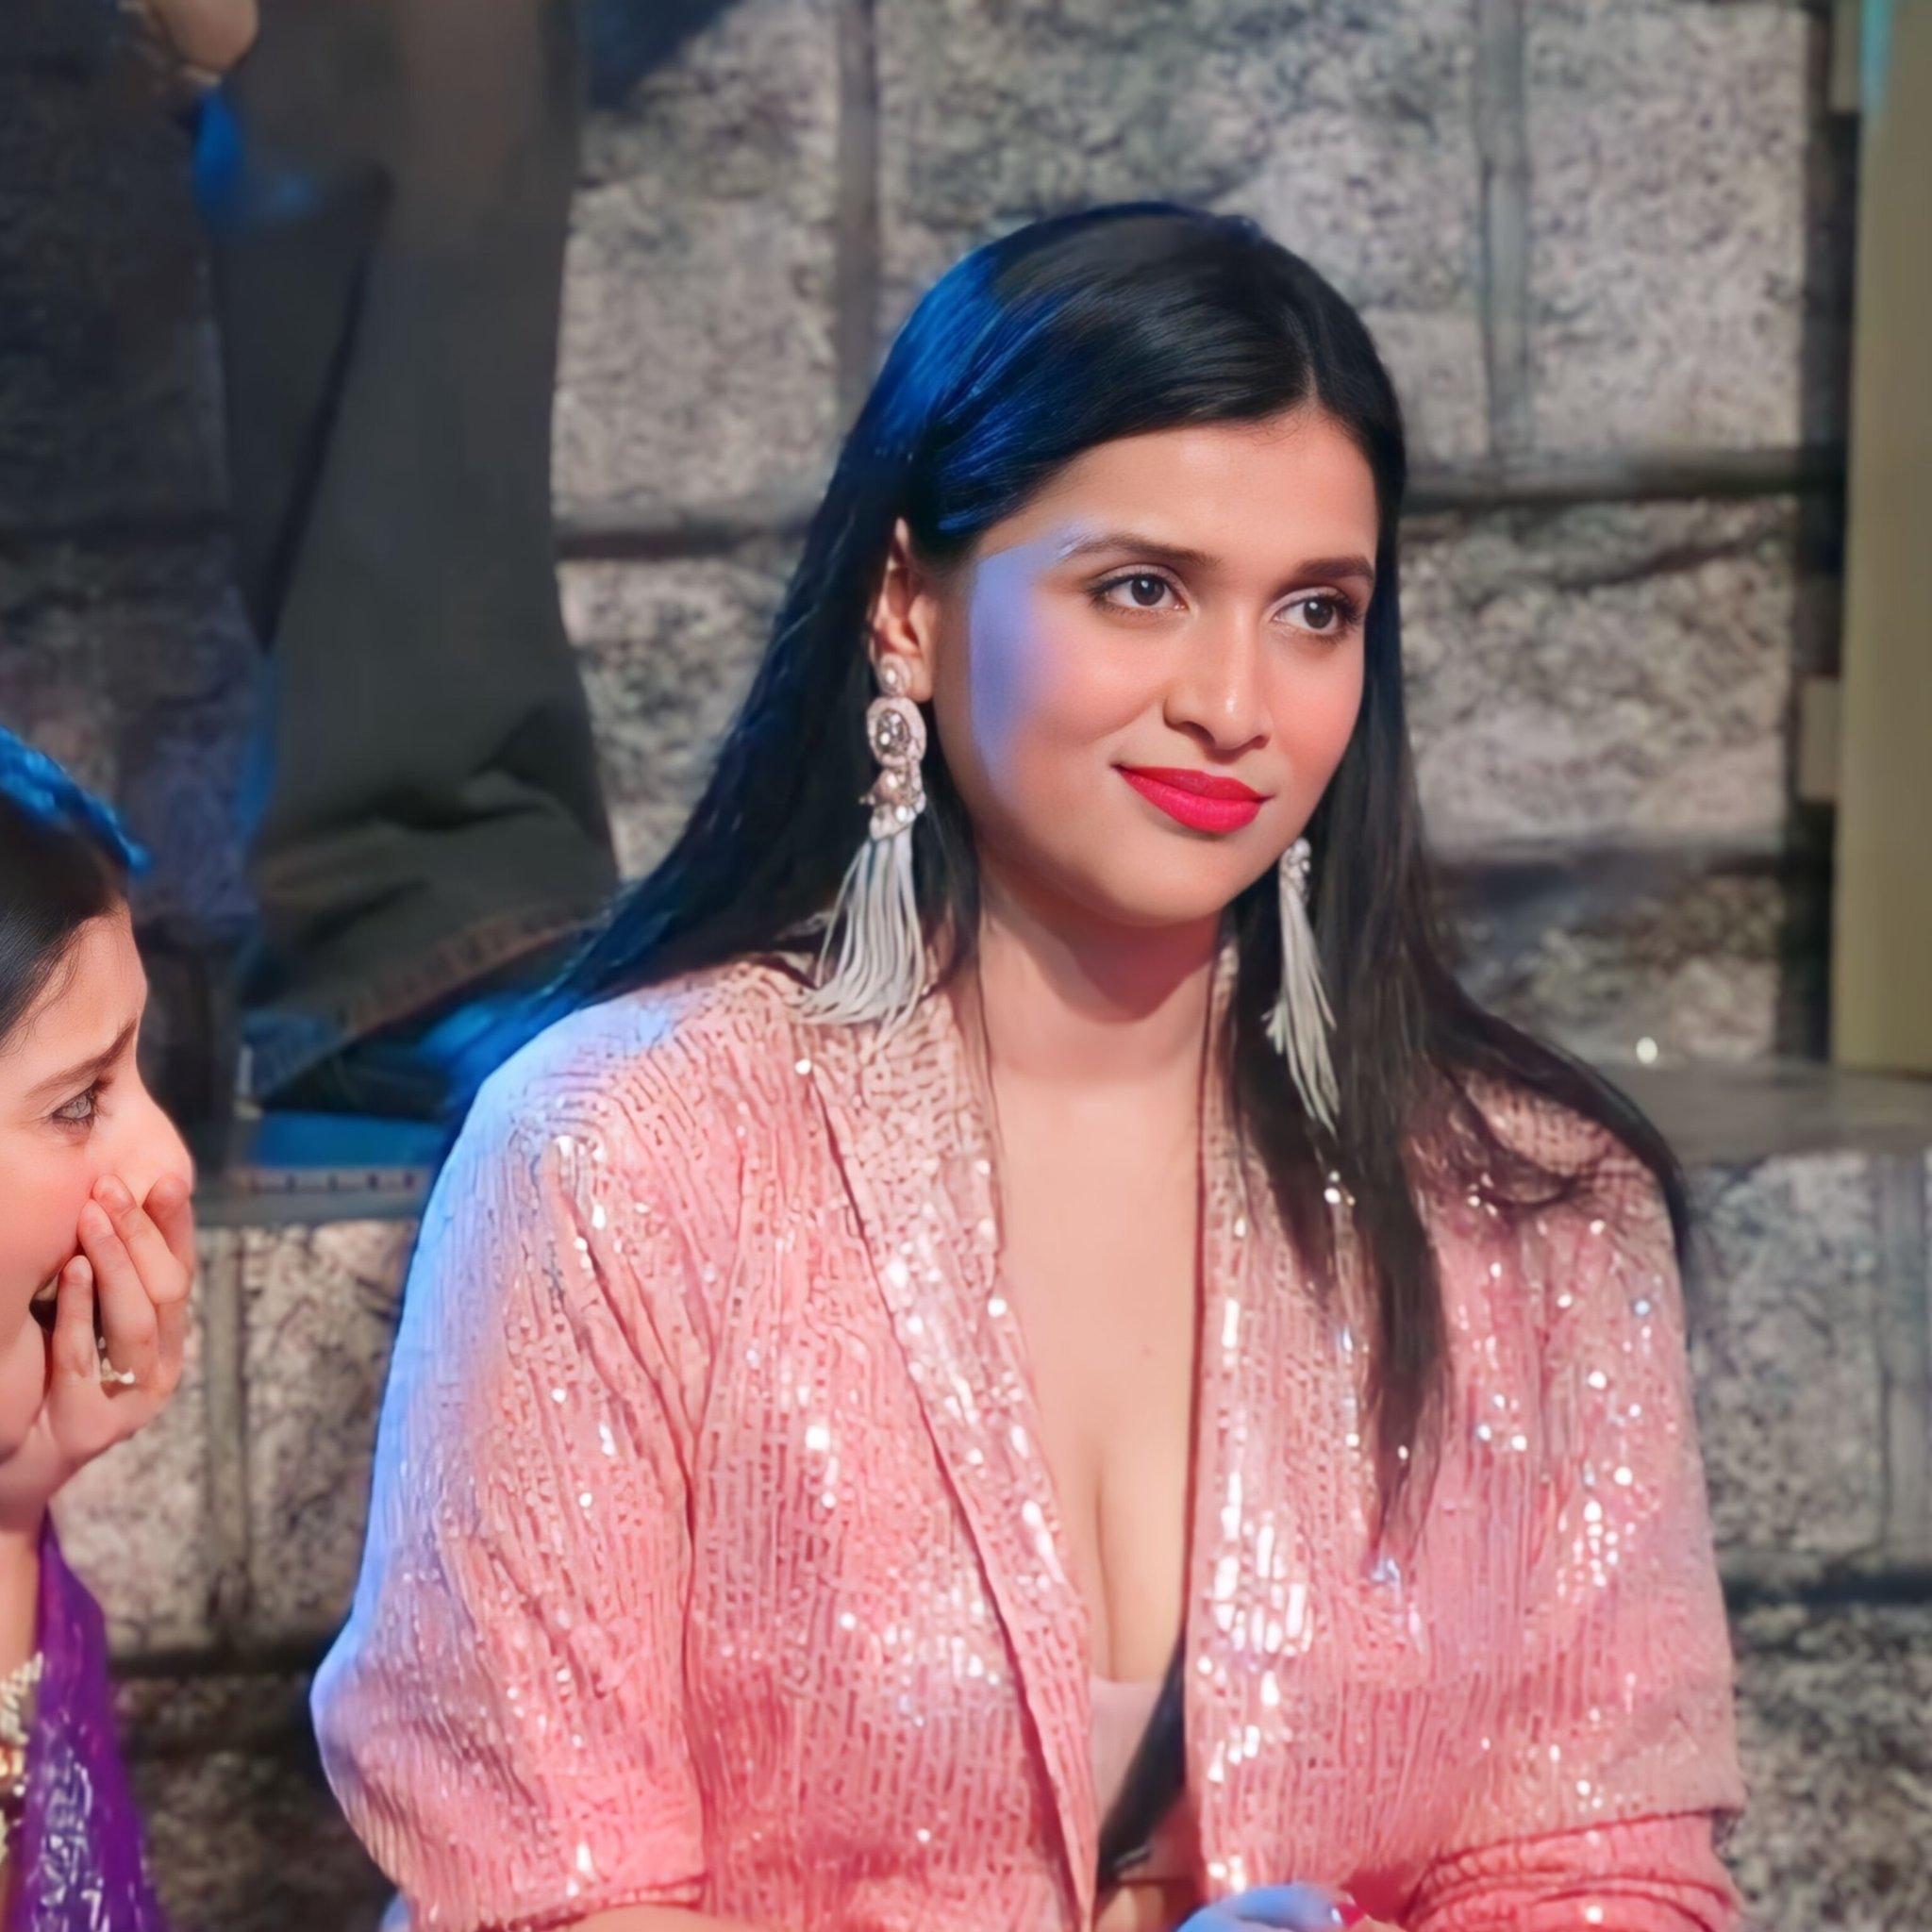 During the roast session in Bigg Boss 17, Mannara donned a peach contemporary yet ethnic ensemble that lit up the night. And those earrings she wore? Stunning!